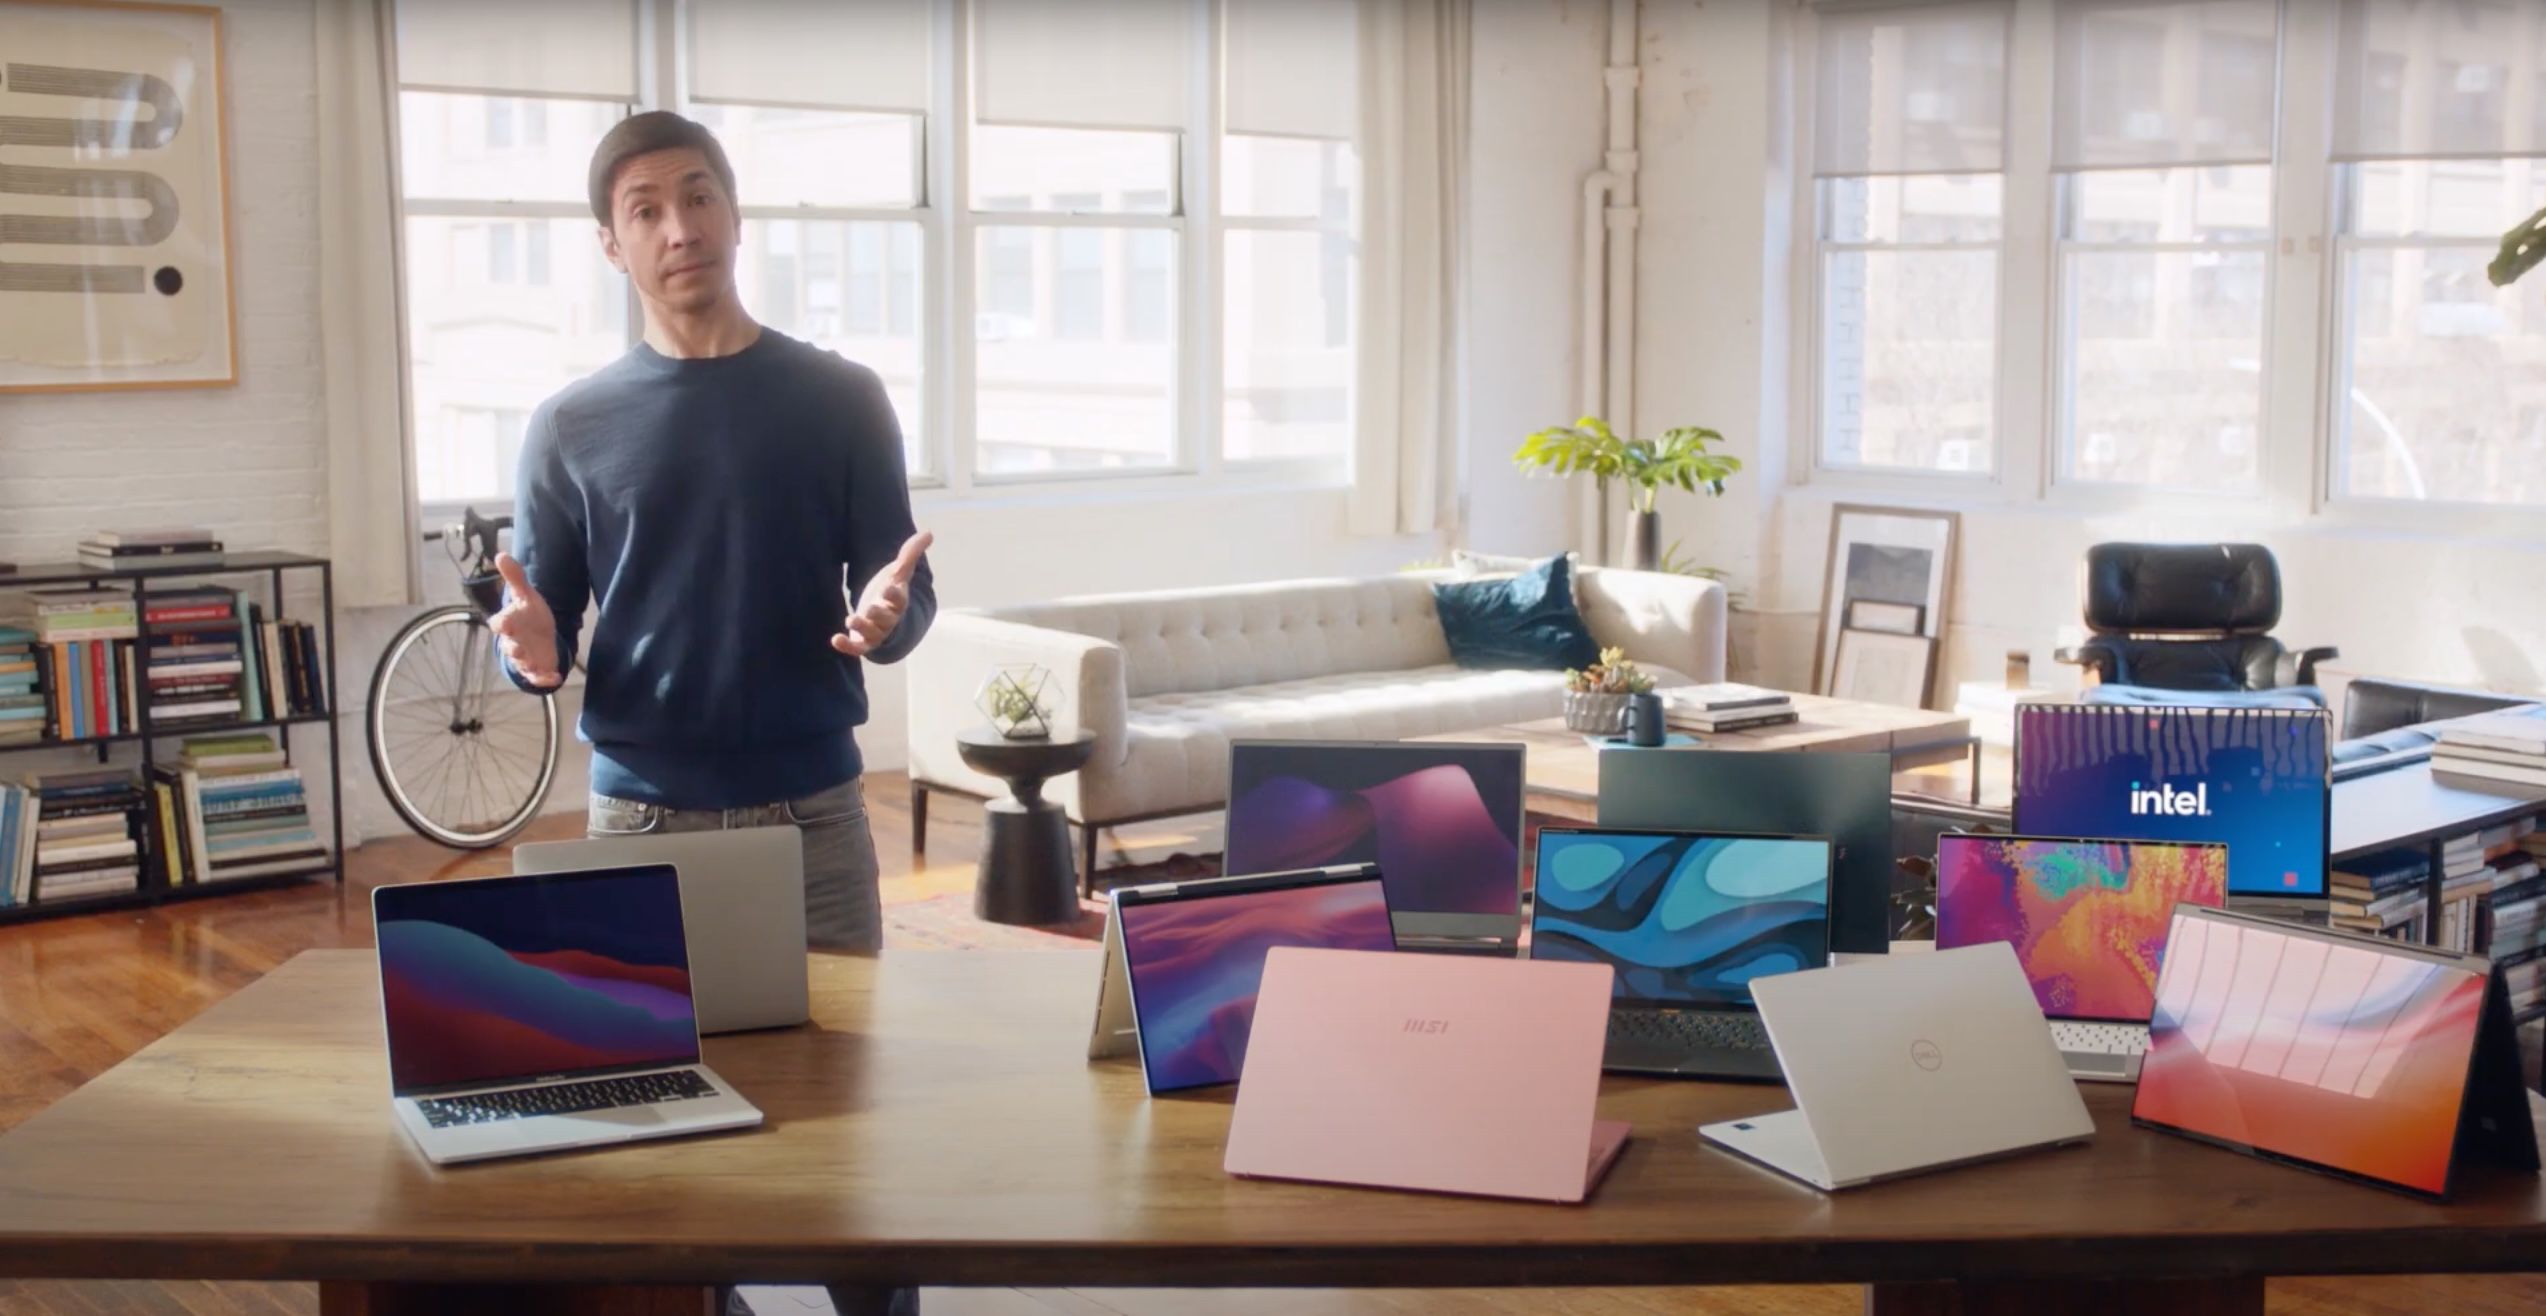 Former ‘I’m a Mac’ actor Justin Long casts shadow at M1 Apple Silicon in new Intel advertising campaign